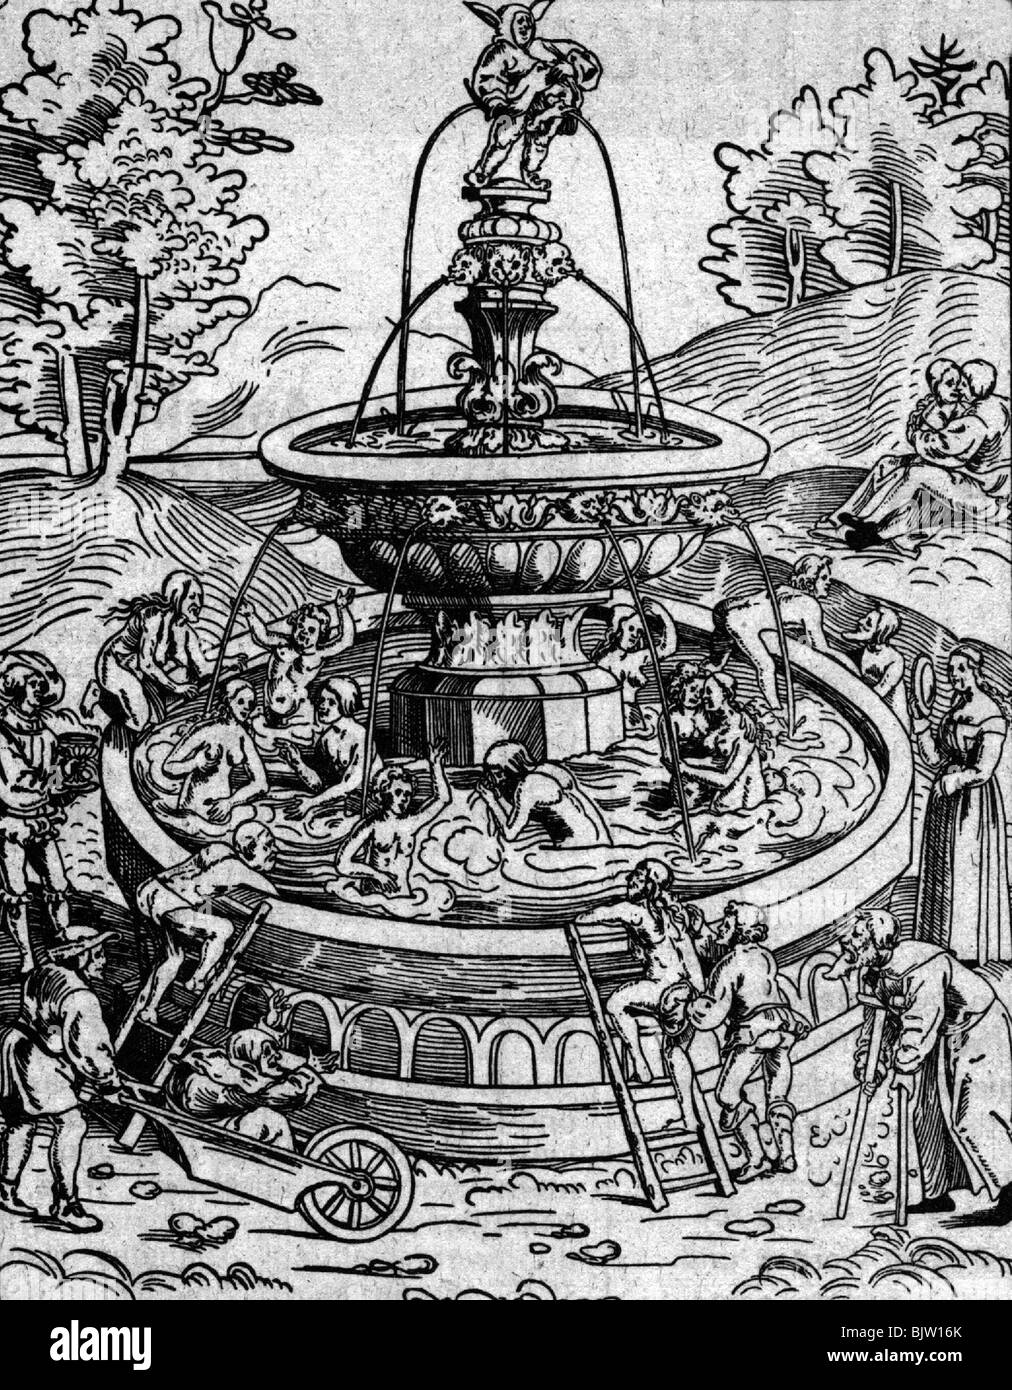 bathing, fountain of youth, caricature by Hans Sebald Beham, 16th century, Stock Photo